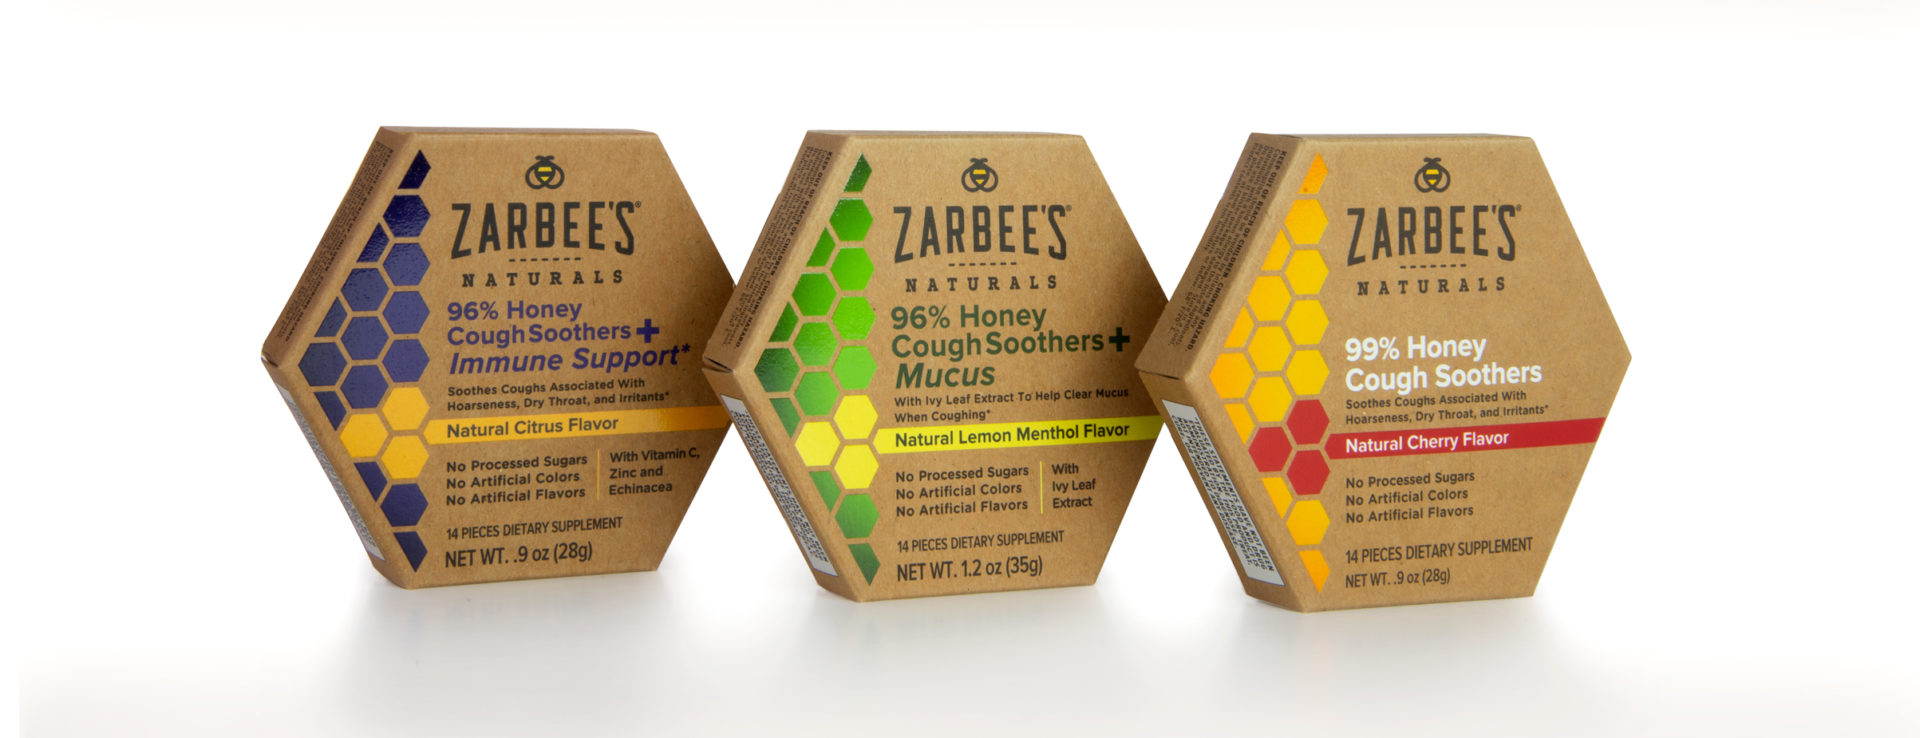 Zarbees_Adult_Soothers_Slider1_2